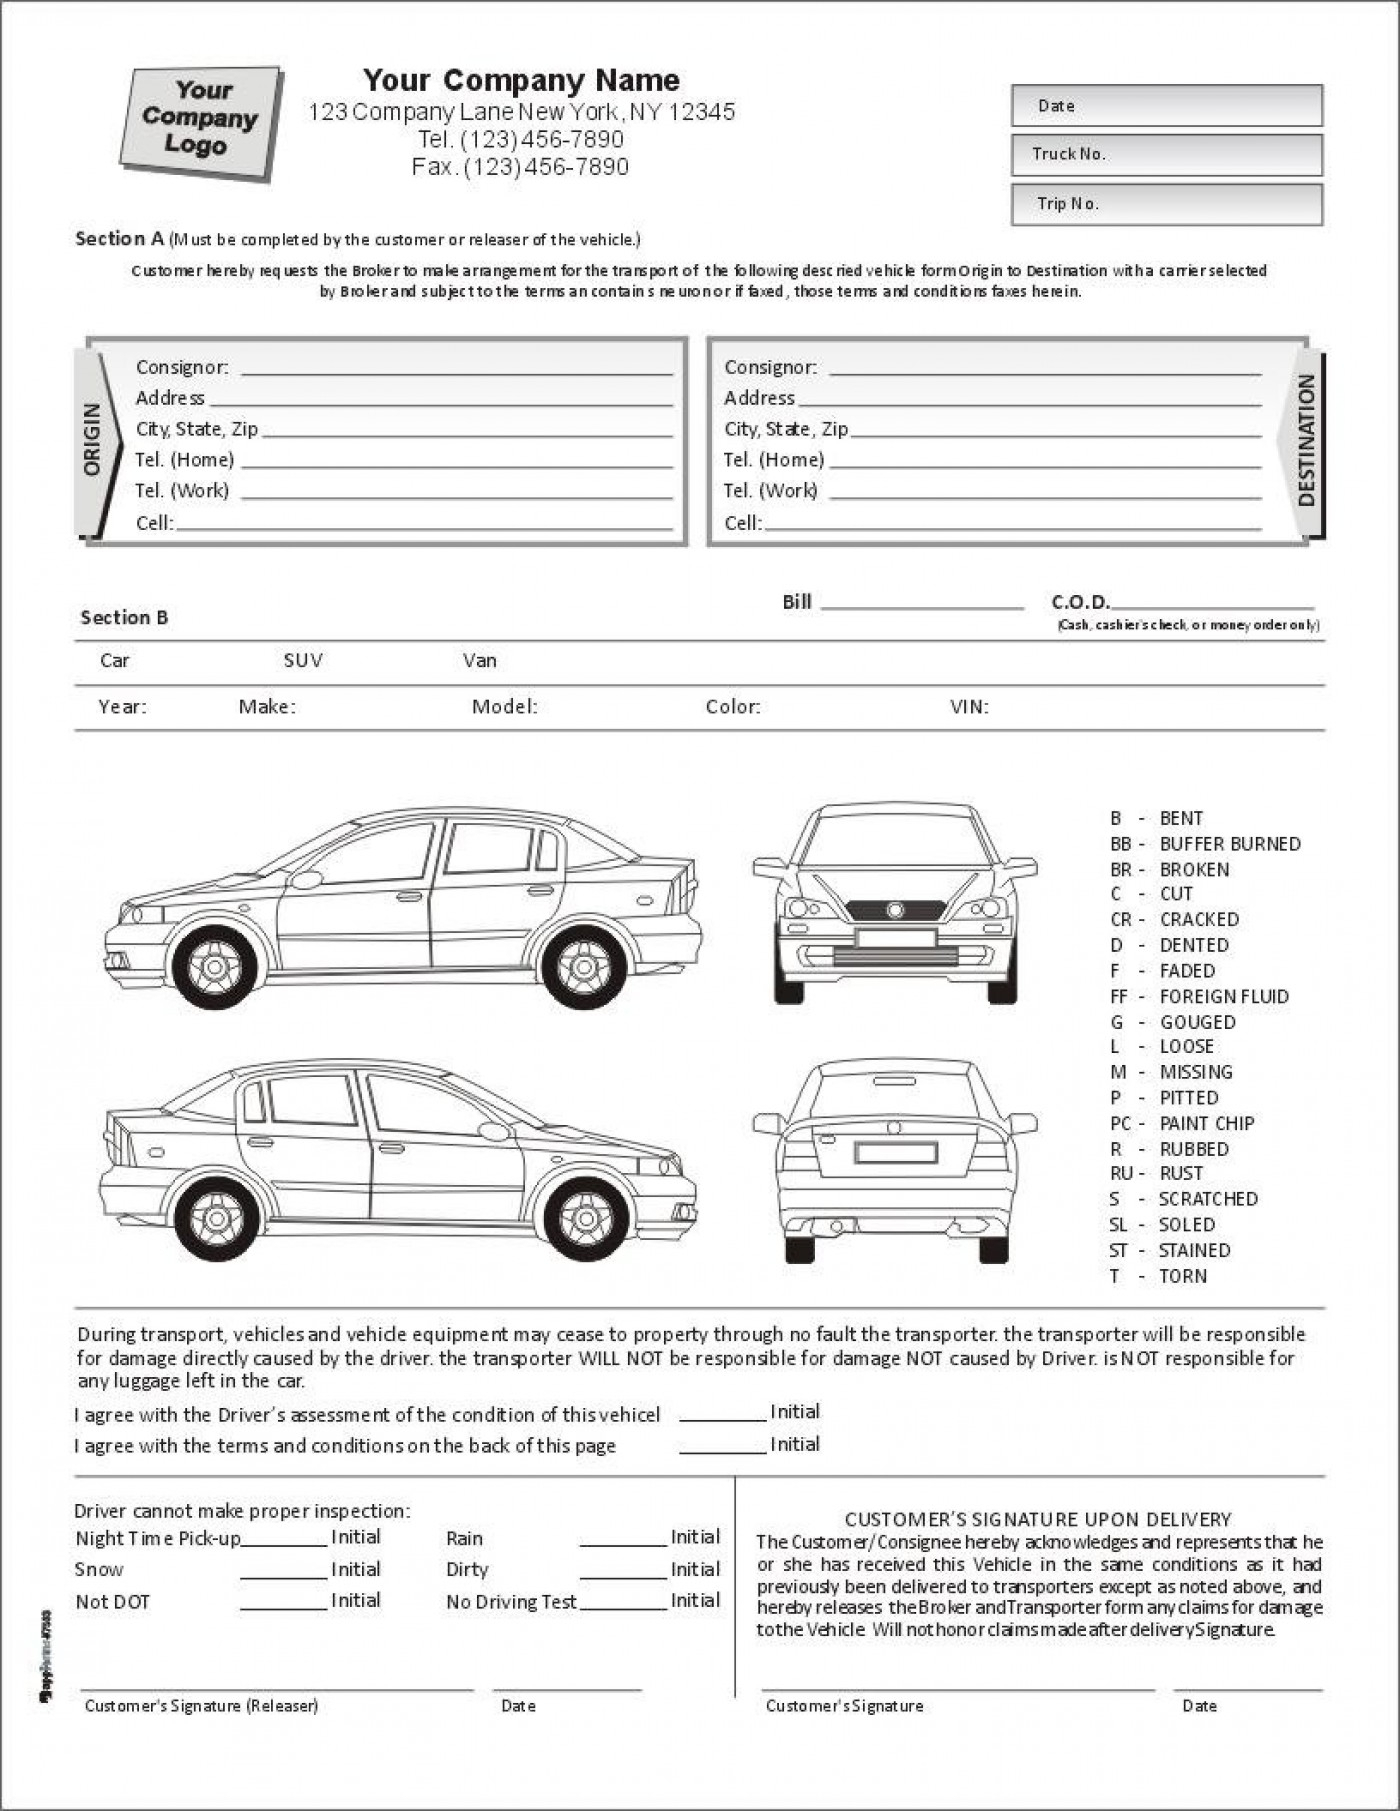 E8Fc7 Vehicle Damage Report Template | Wiring Resources Regarding Car Damage Report Template